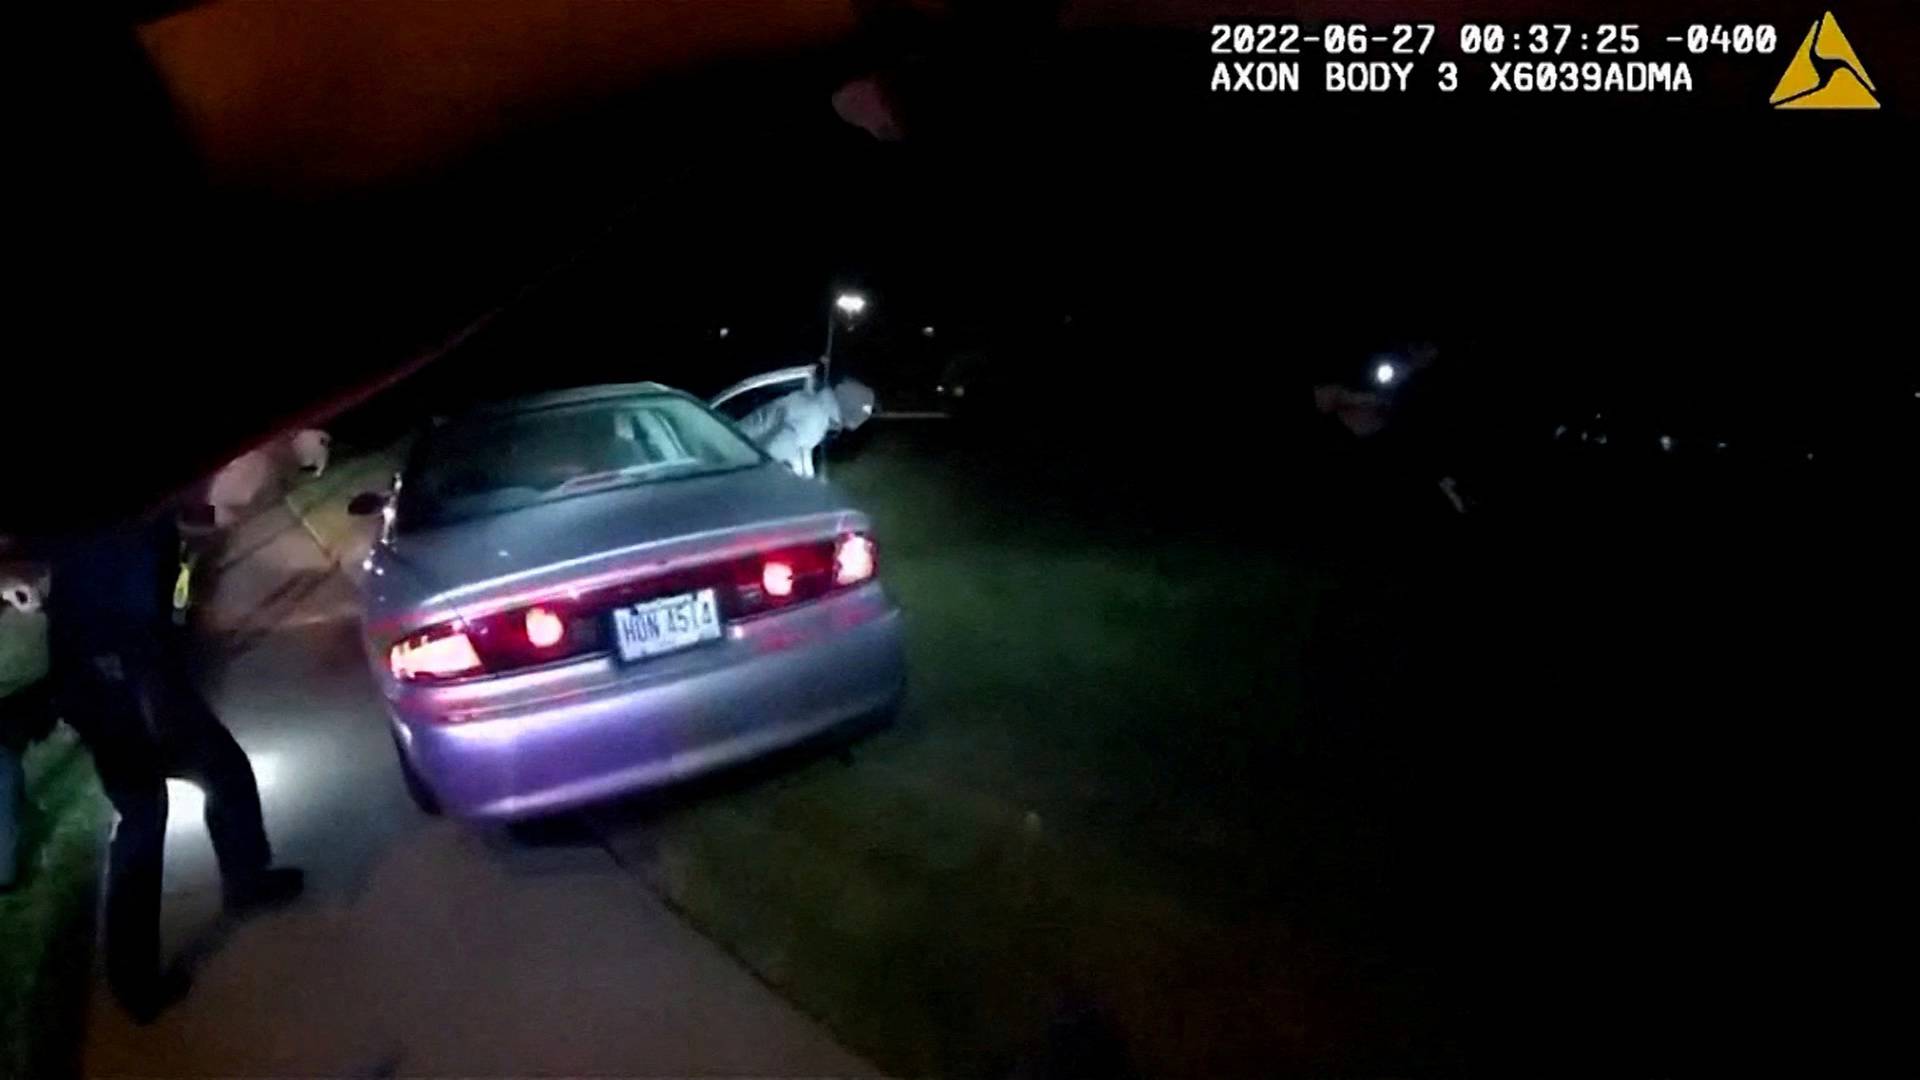 Body camera still from video of the police shooting of Jayland Walker in Akron